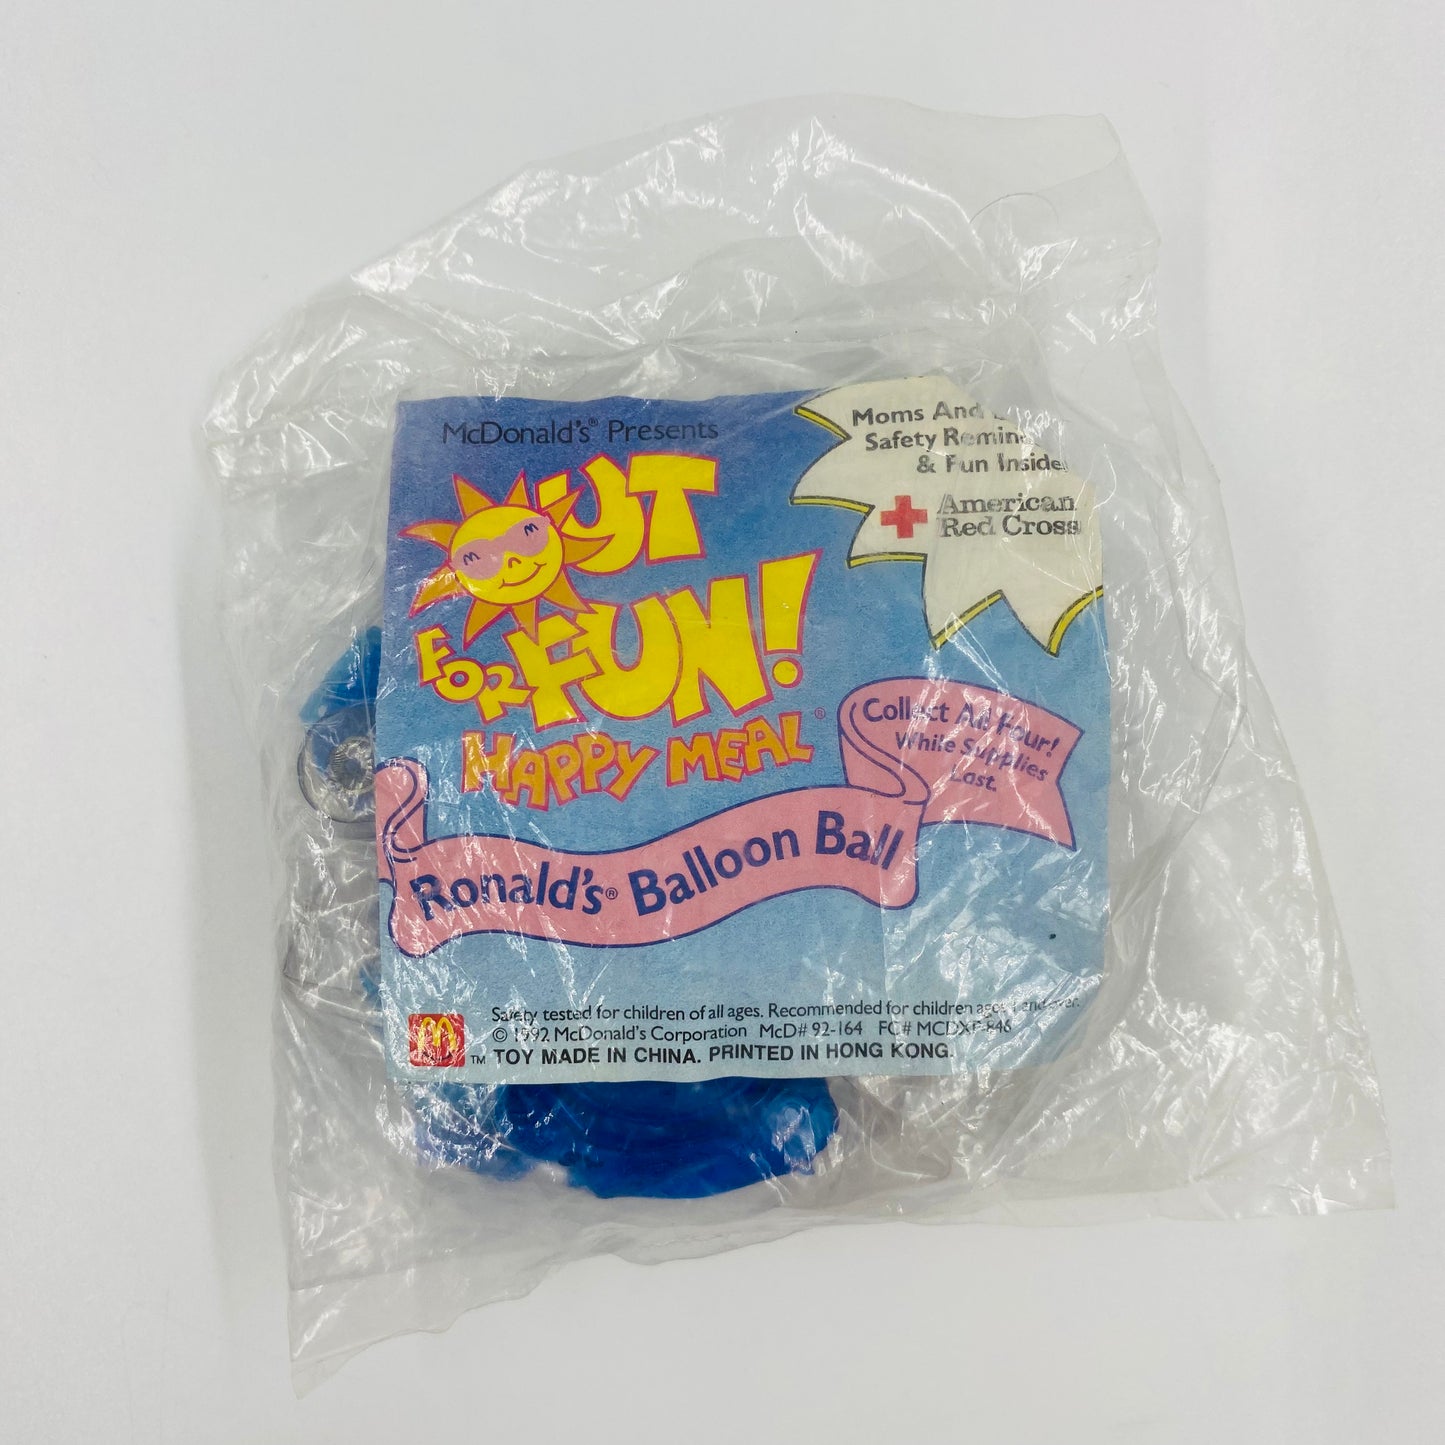 McDonald's Presents Out For Fun! Ronald's Balloon Ball McDonald's Happy Meal toy (1992) bagged